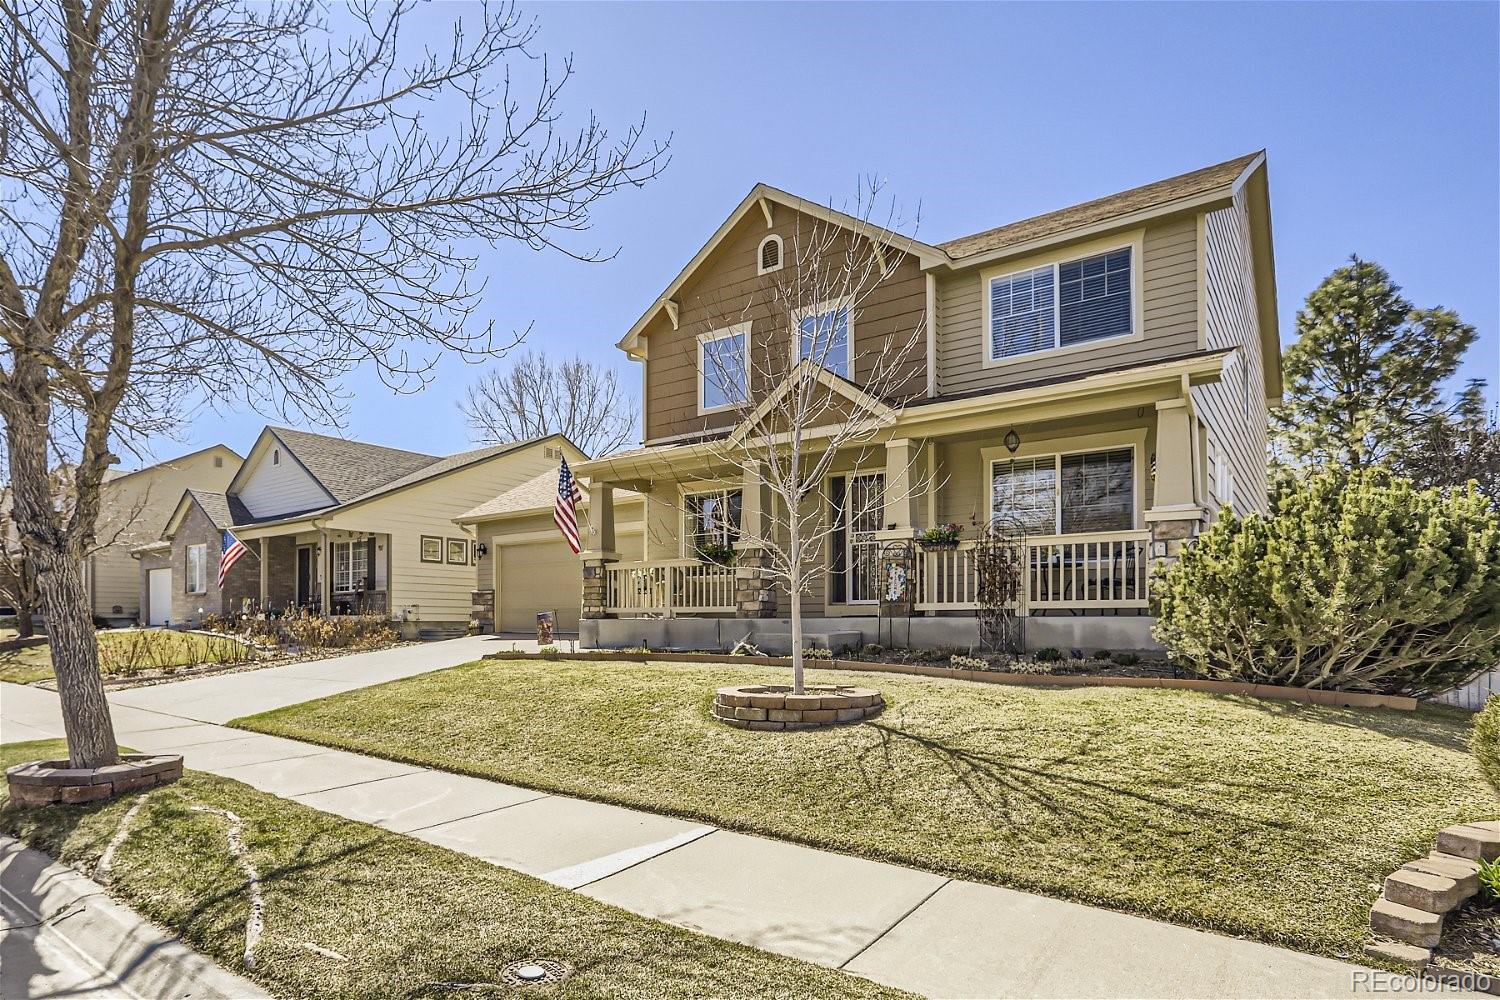 Report Image for 11395  Kingston Street,Commerce City, Colorado